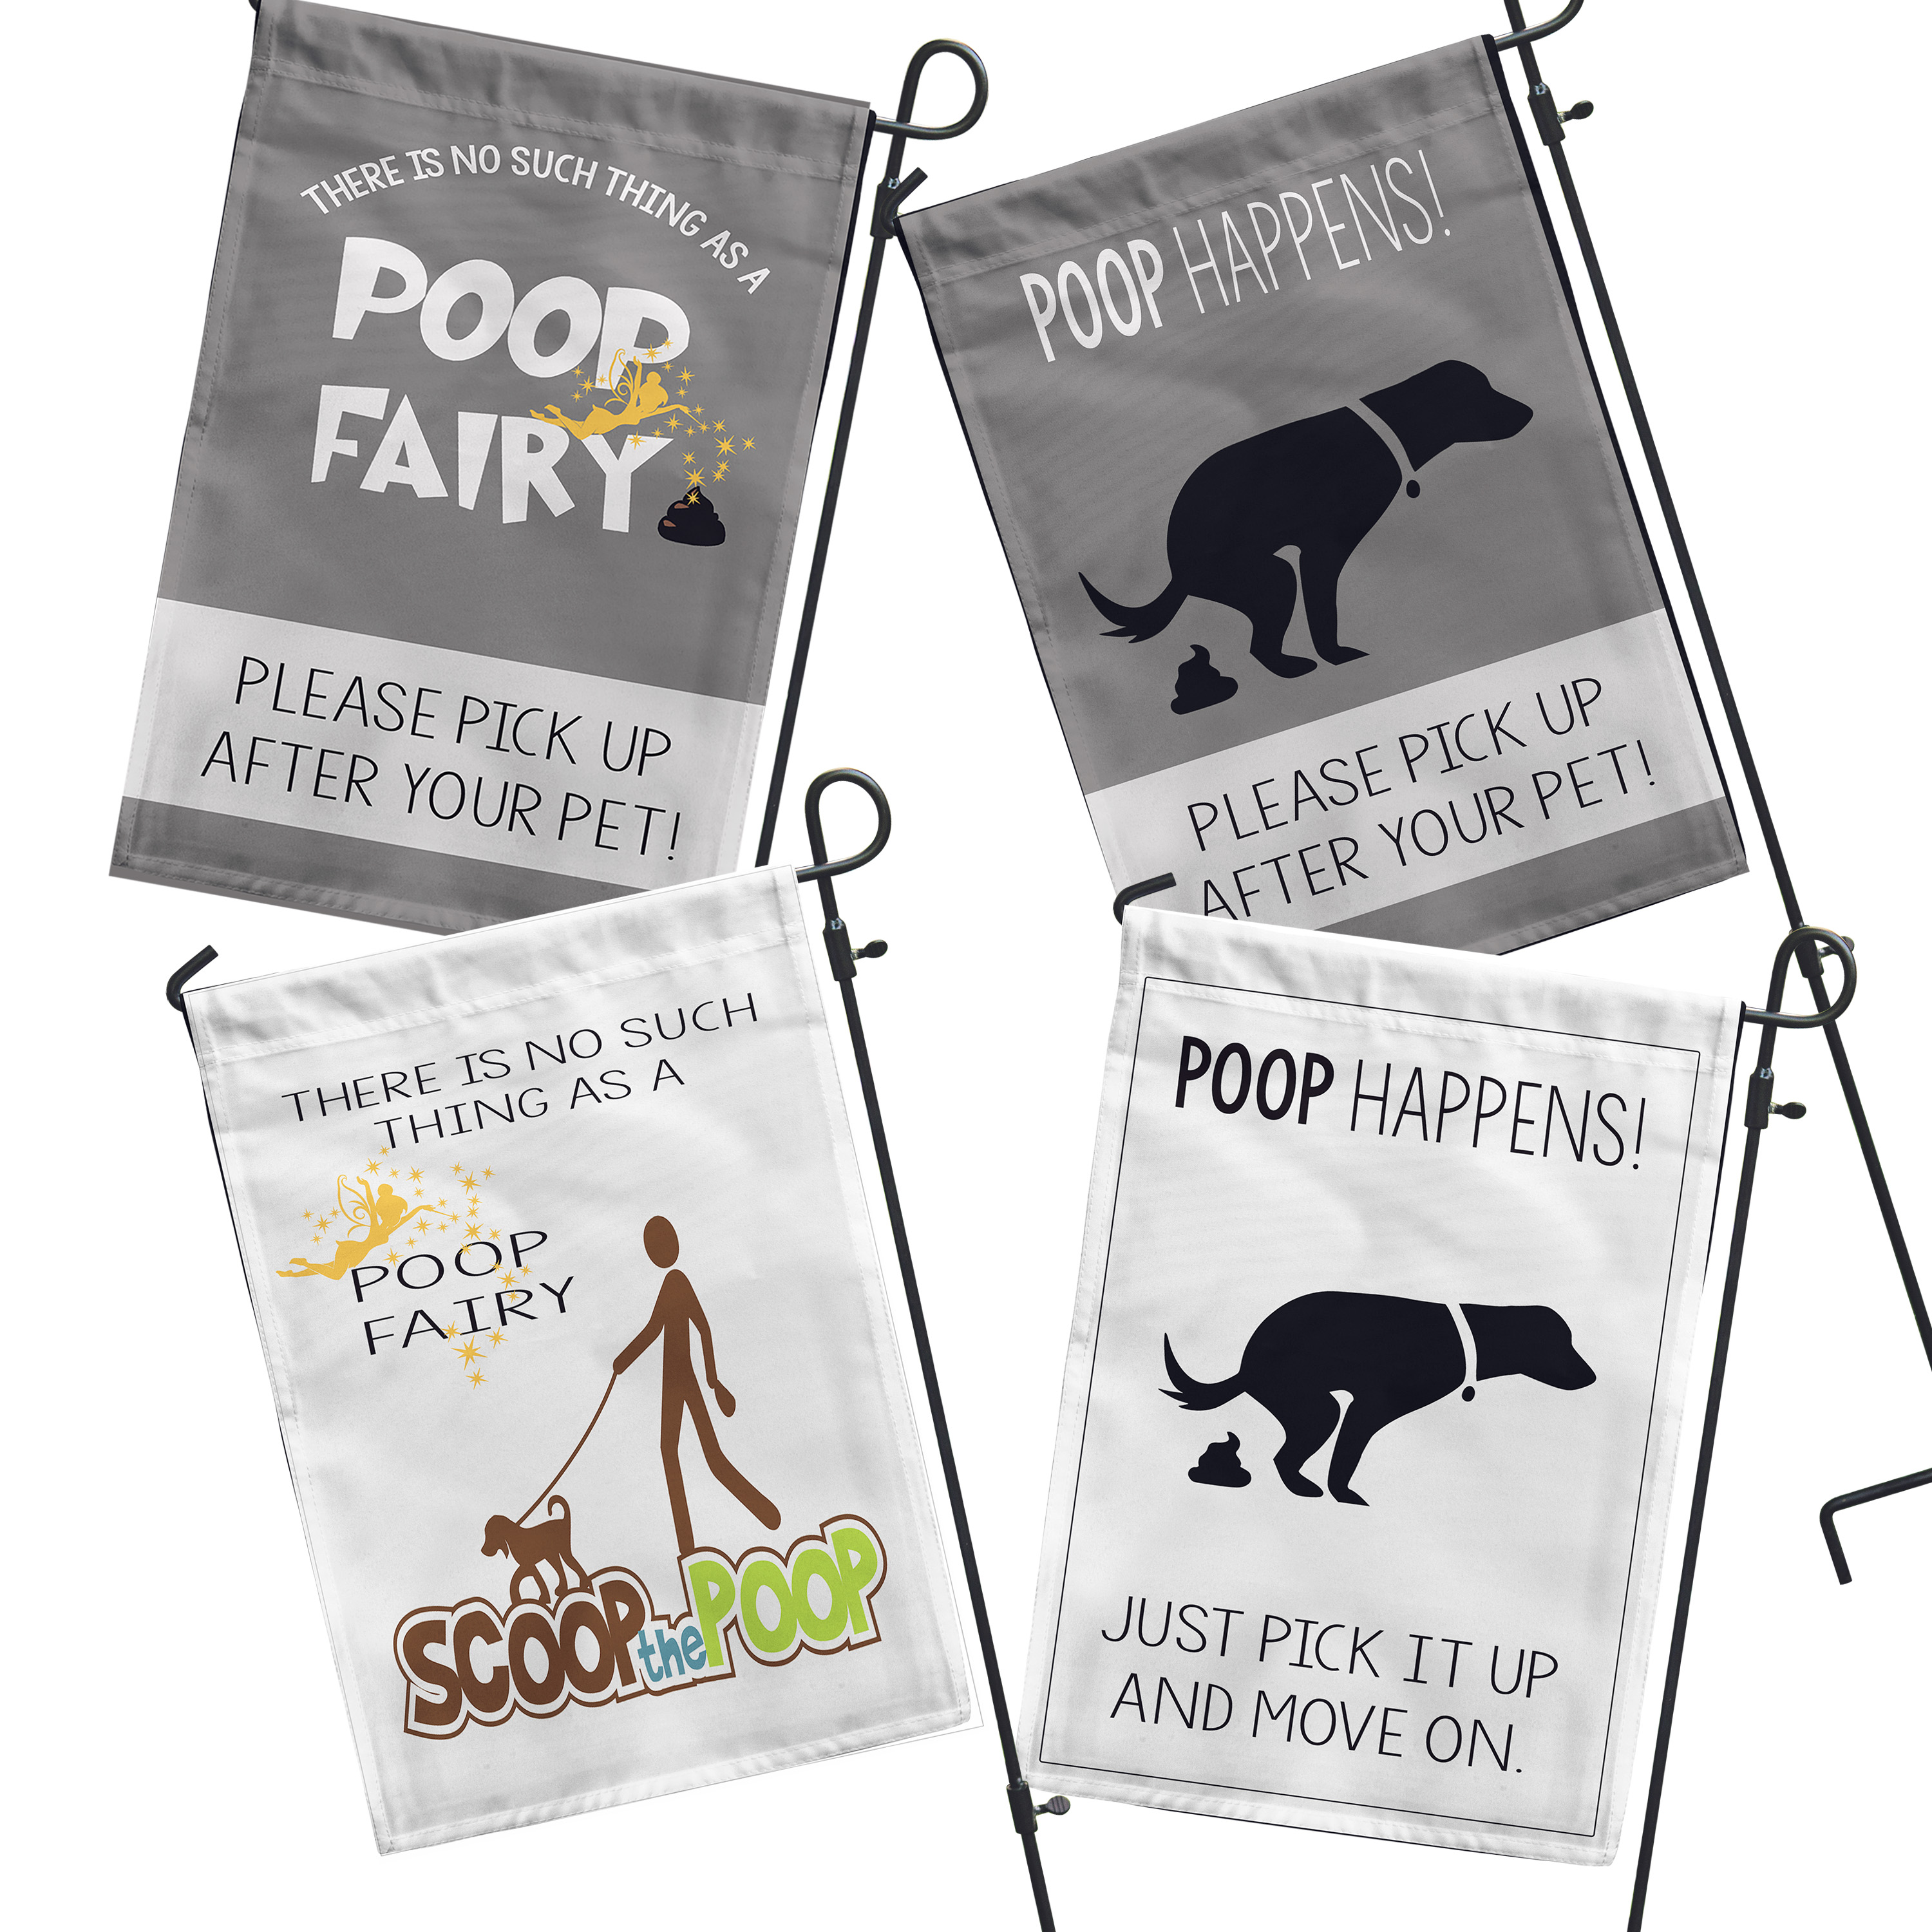 No Poop Fairy Garden Flag made with sublimation printing